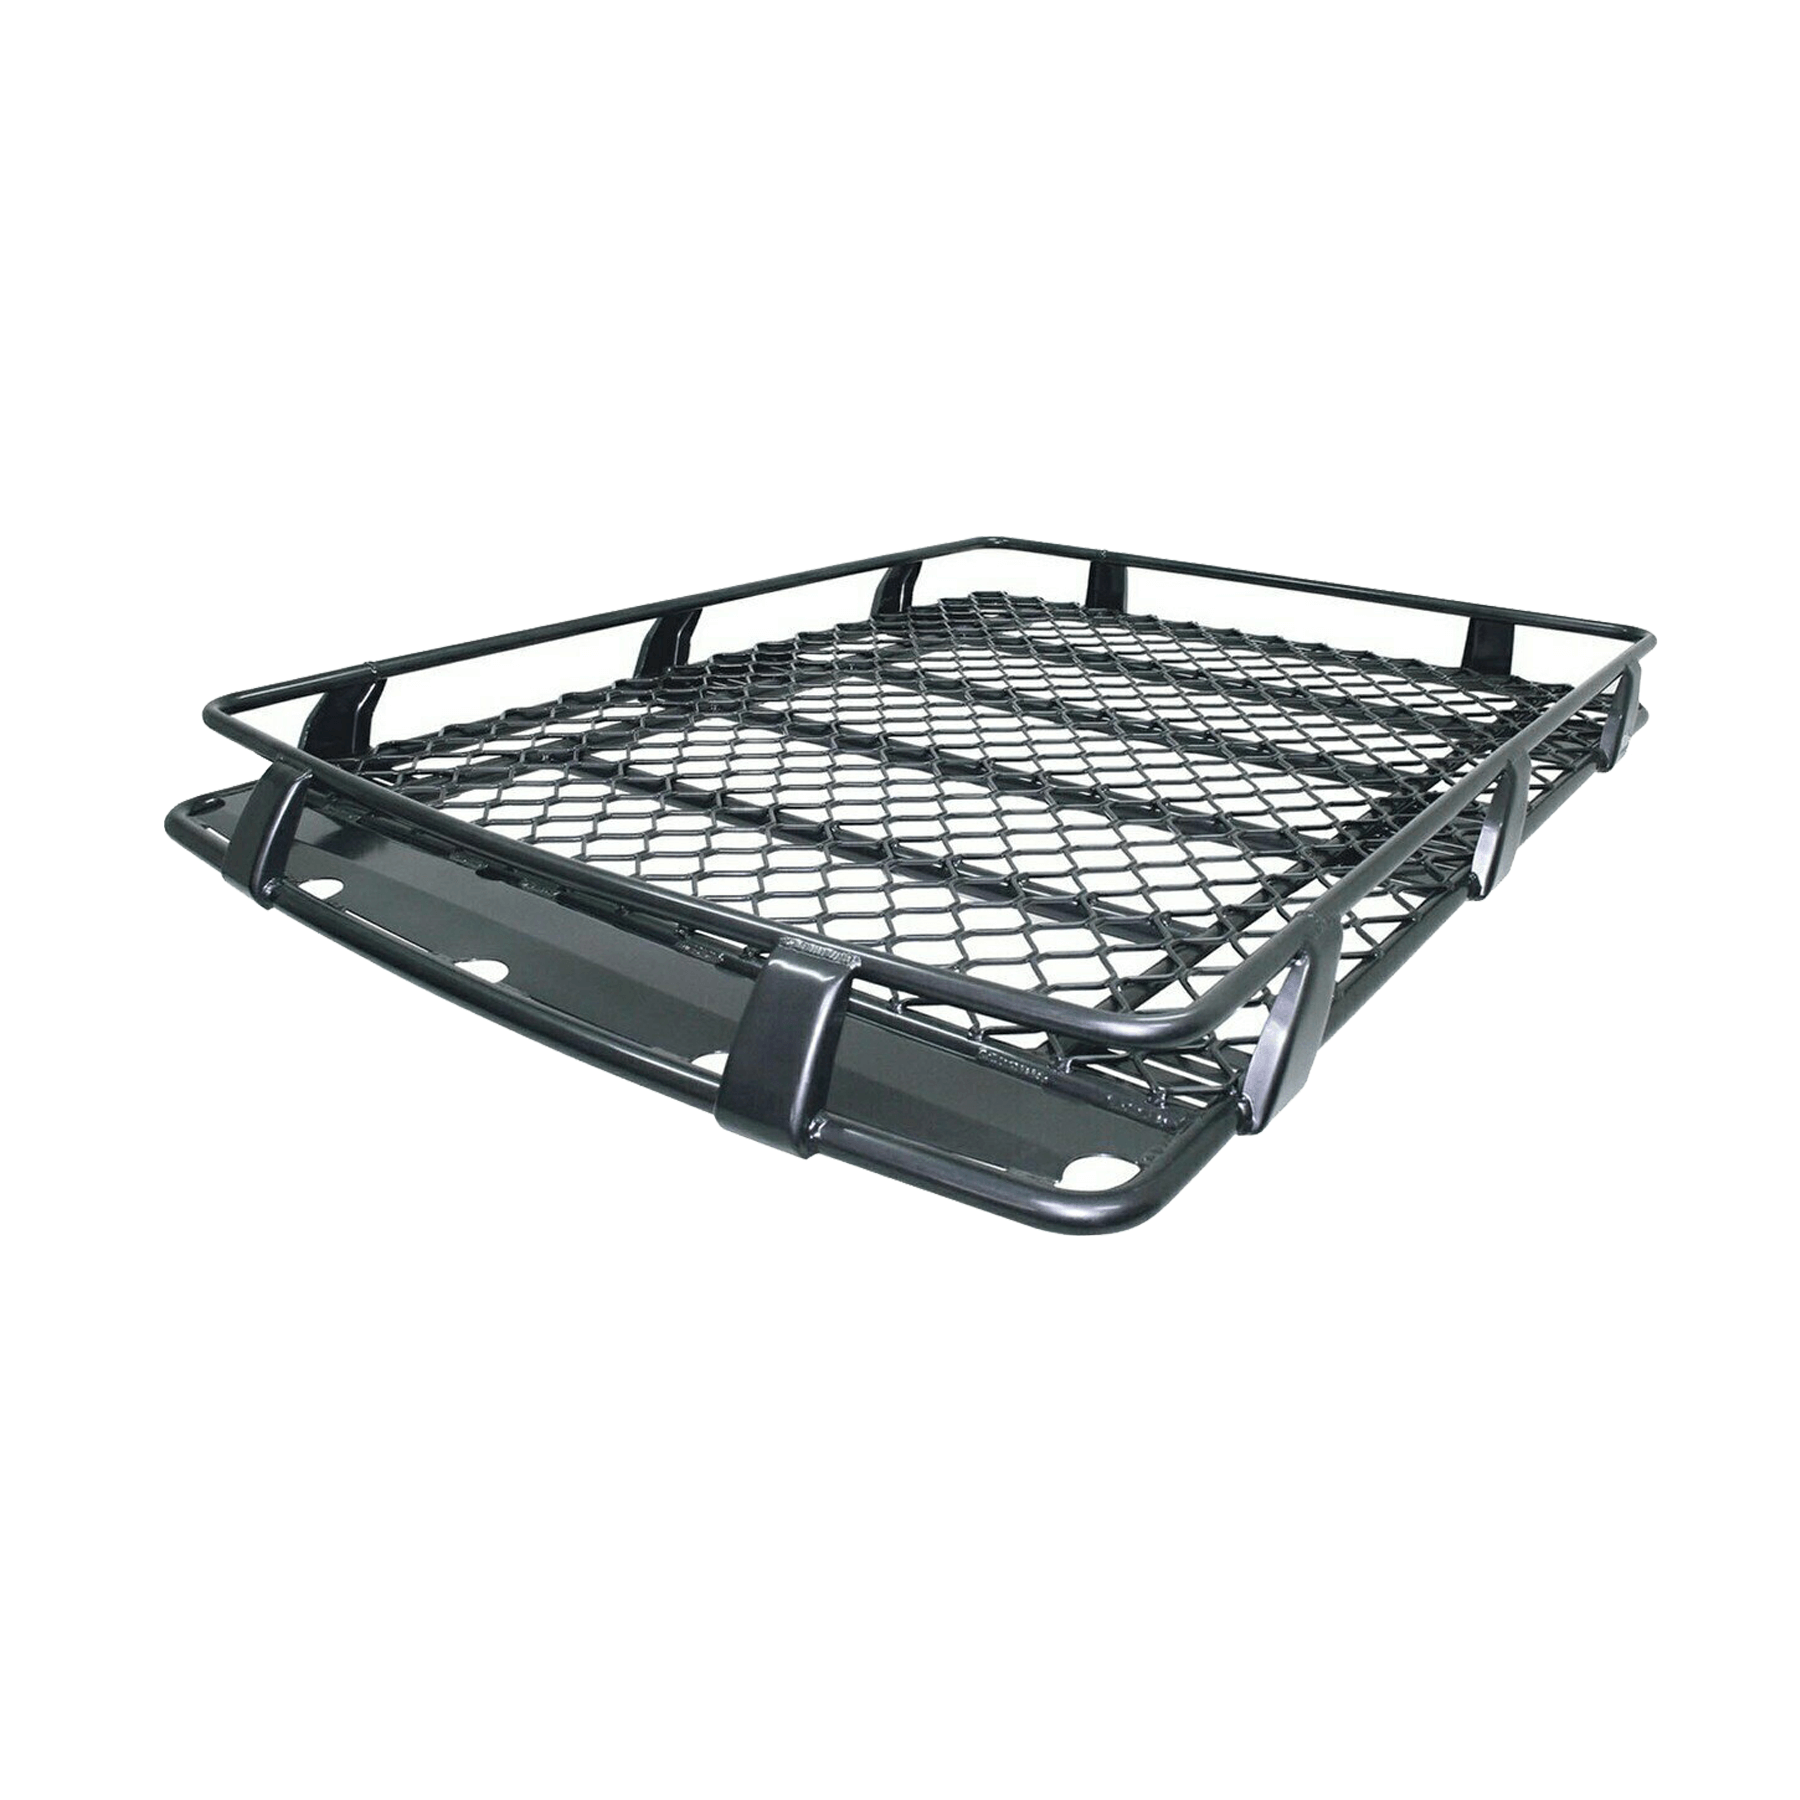 PATROL Y60 GQ 1987 to 1997 Basket Alloy Roof Rack- 1.8m x 1.25m (Open end)